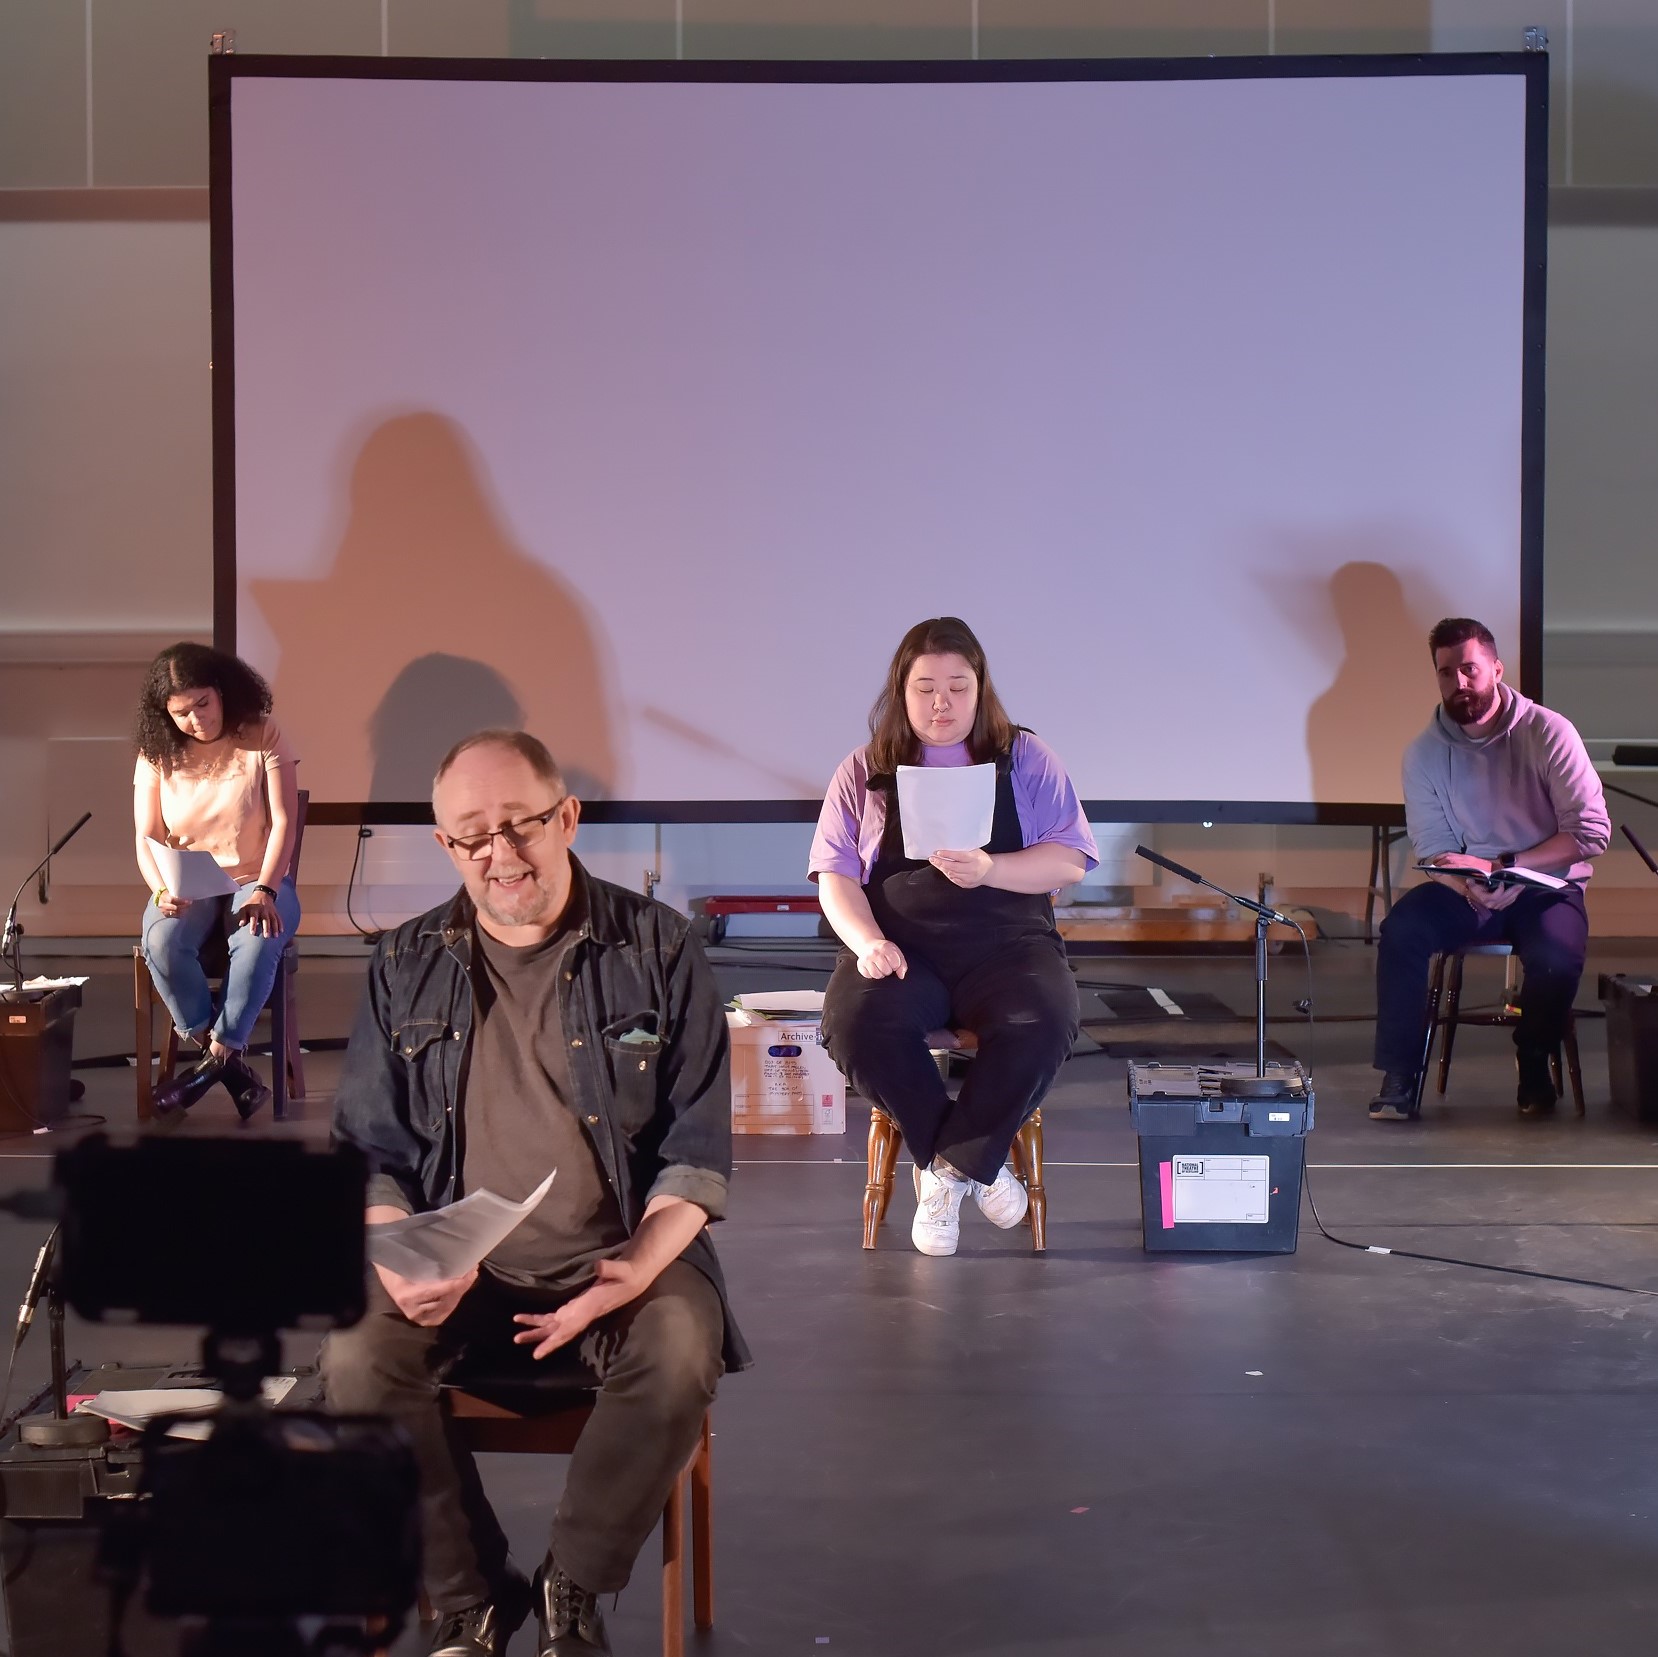 Photo of four people sitting on chairs reading from paper. There is a white projector screen at the back, and a filming camera in the foreground.